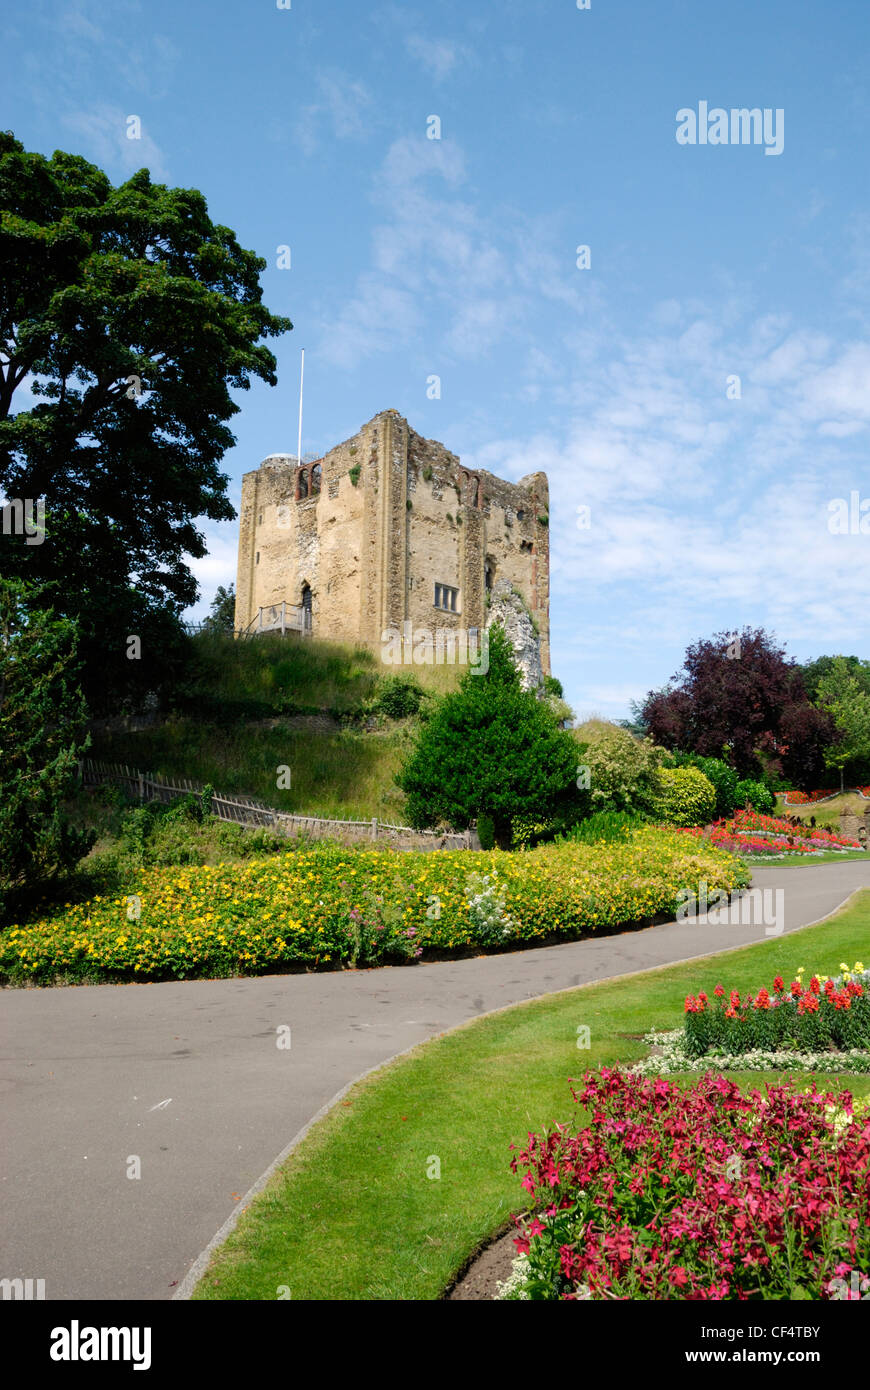 Guildford Castle tower keep and gardens. The castle started out as a Norman motte and bailey castle, built soon after 1066. Unde Stock Photo